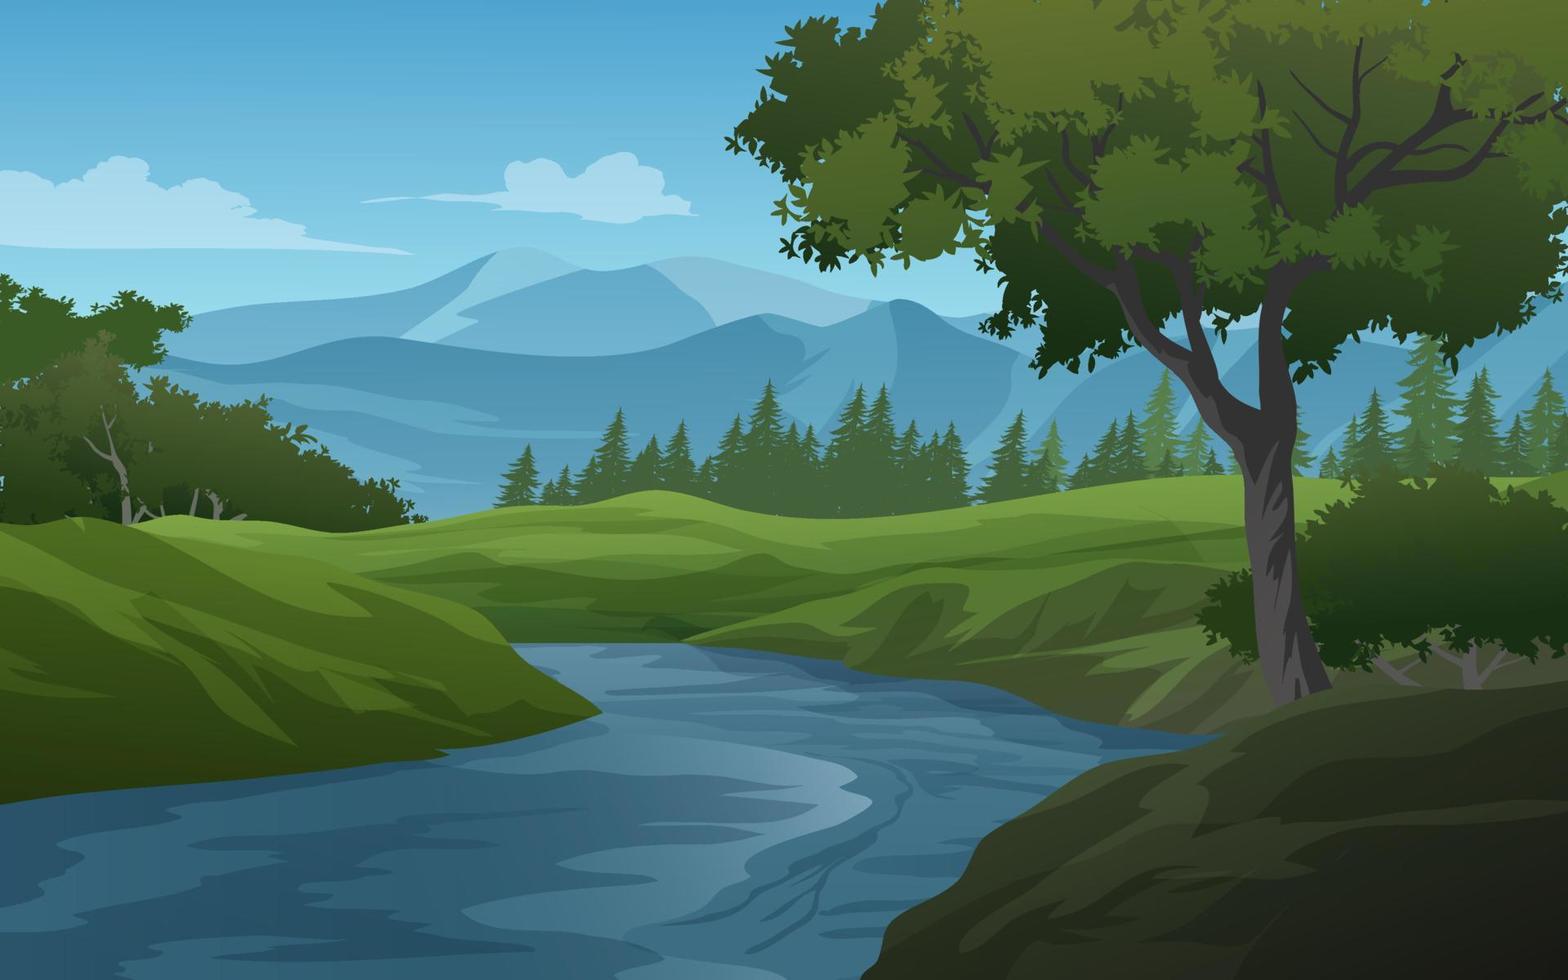 Nature landscape with mountains and a tree by river vector